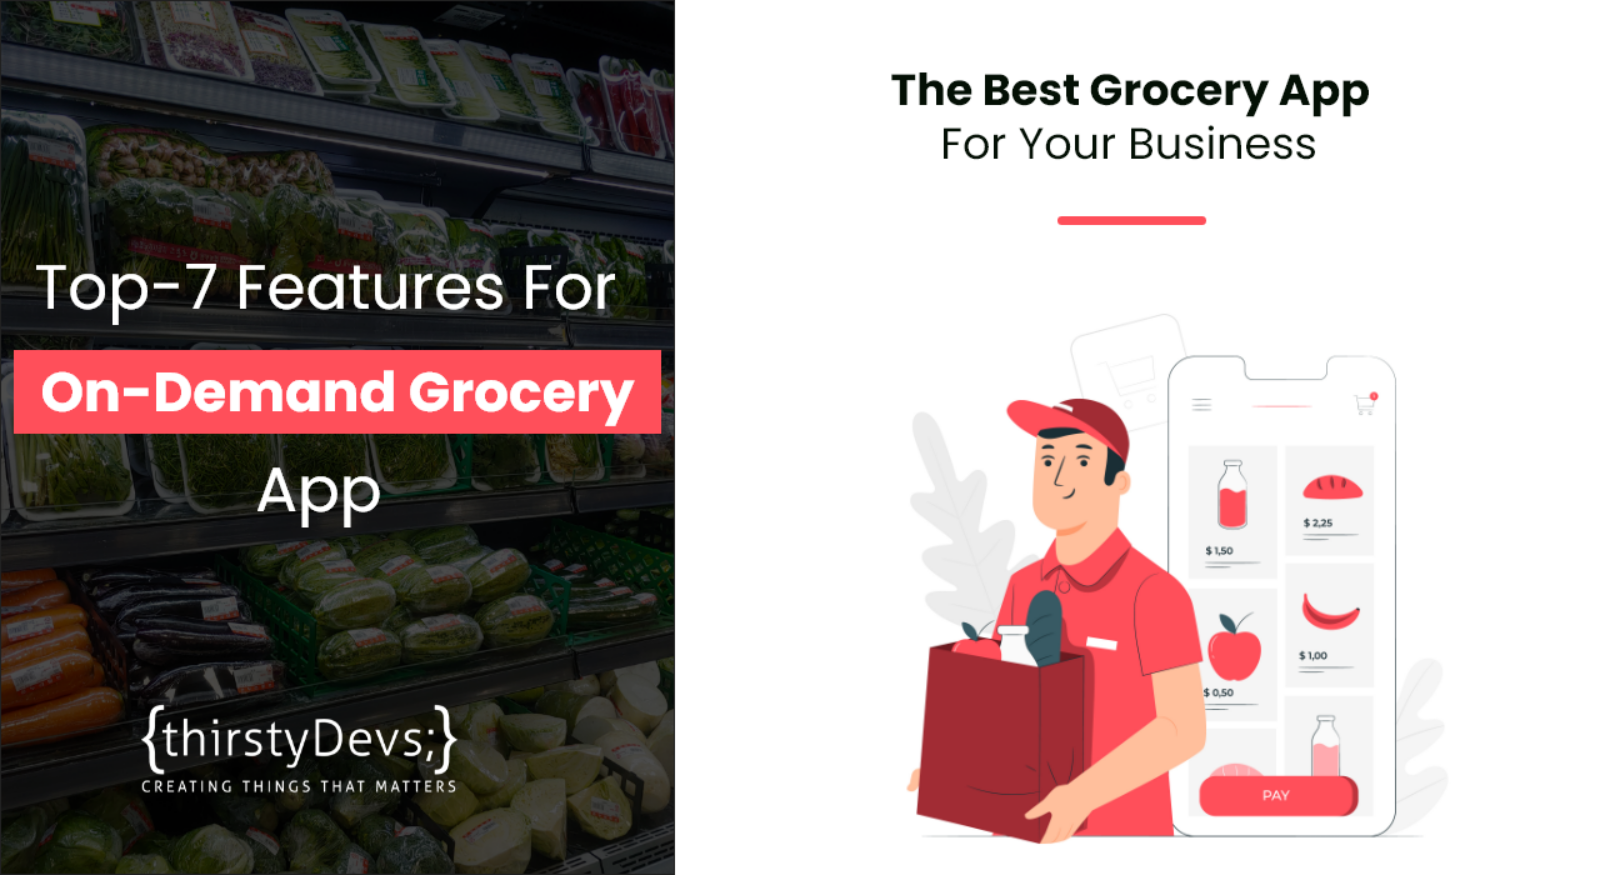 Top-7 Features For On-Demand Grocery Apps